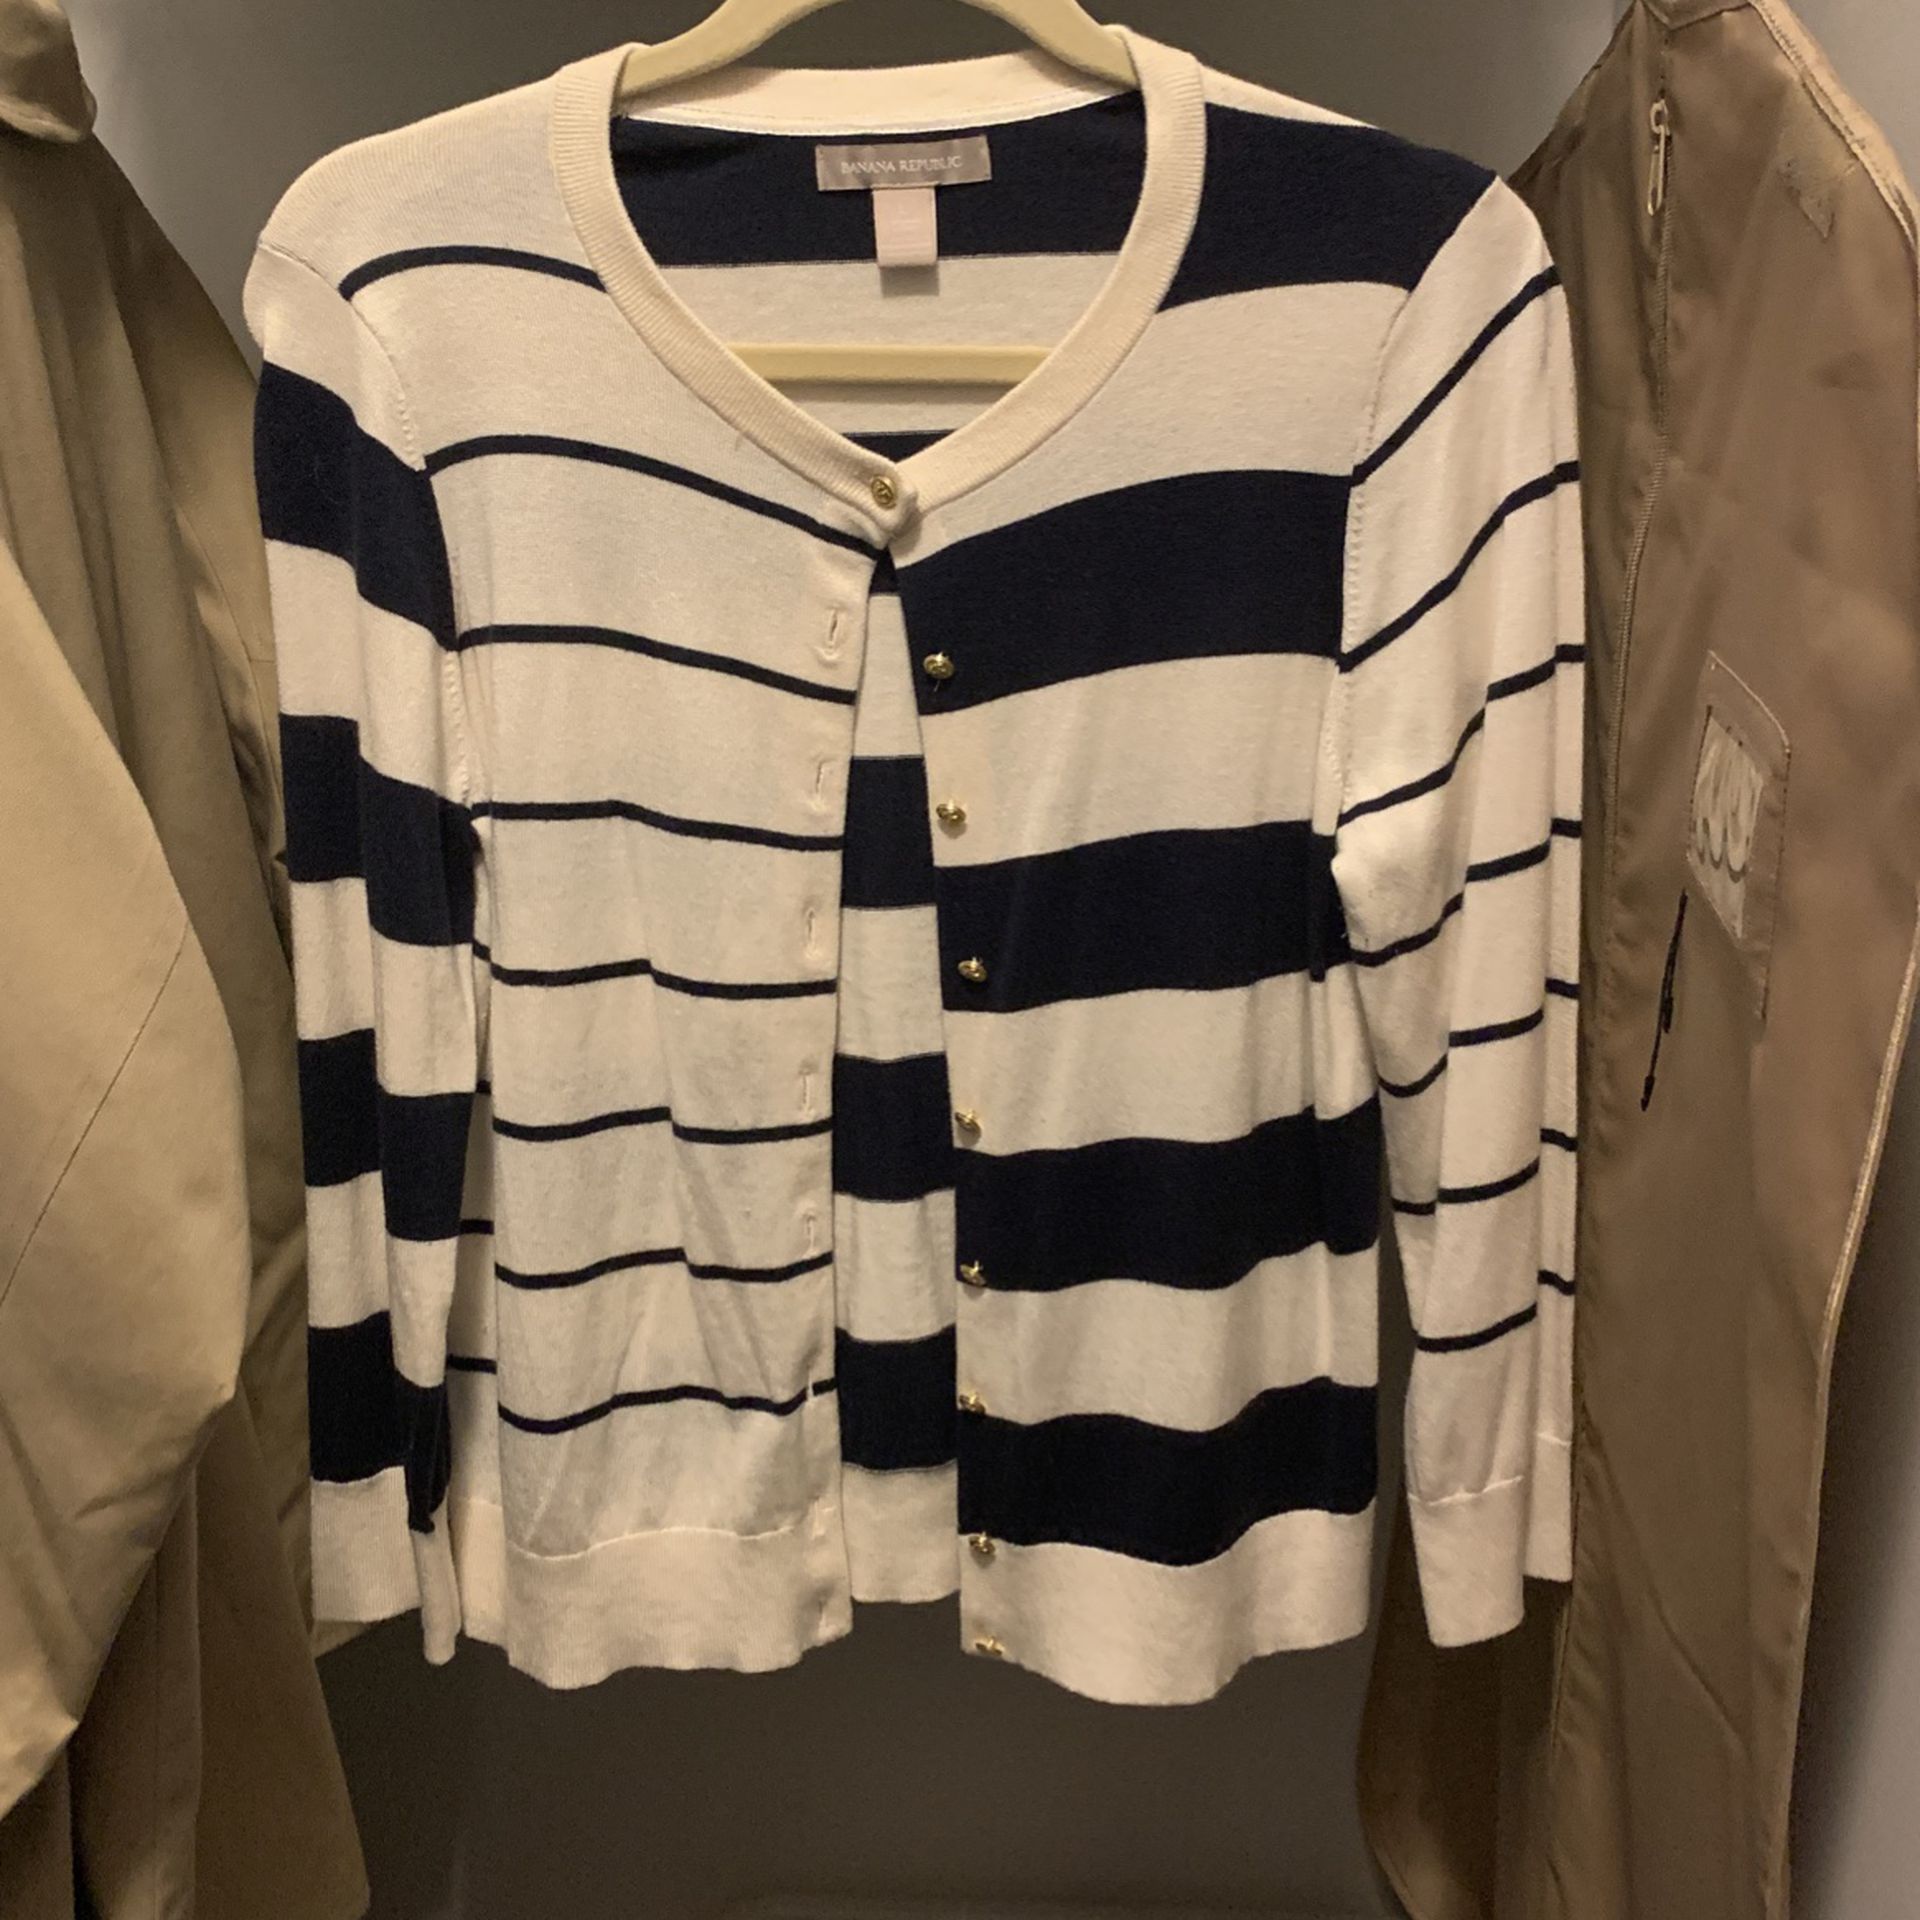 Banana Republic Navy and White Striped Cardigan with gold anchor buttons